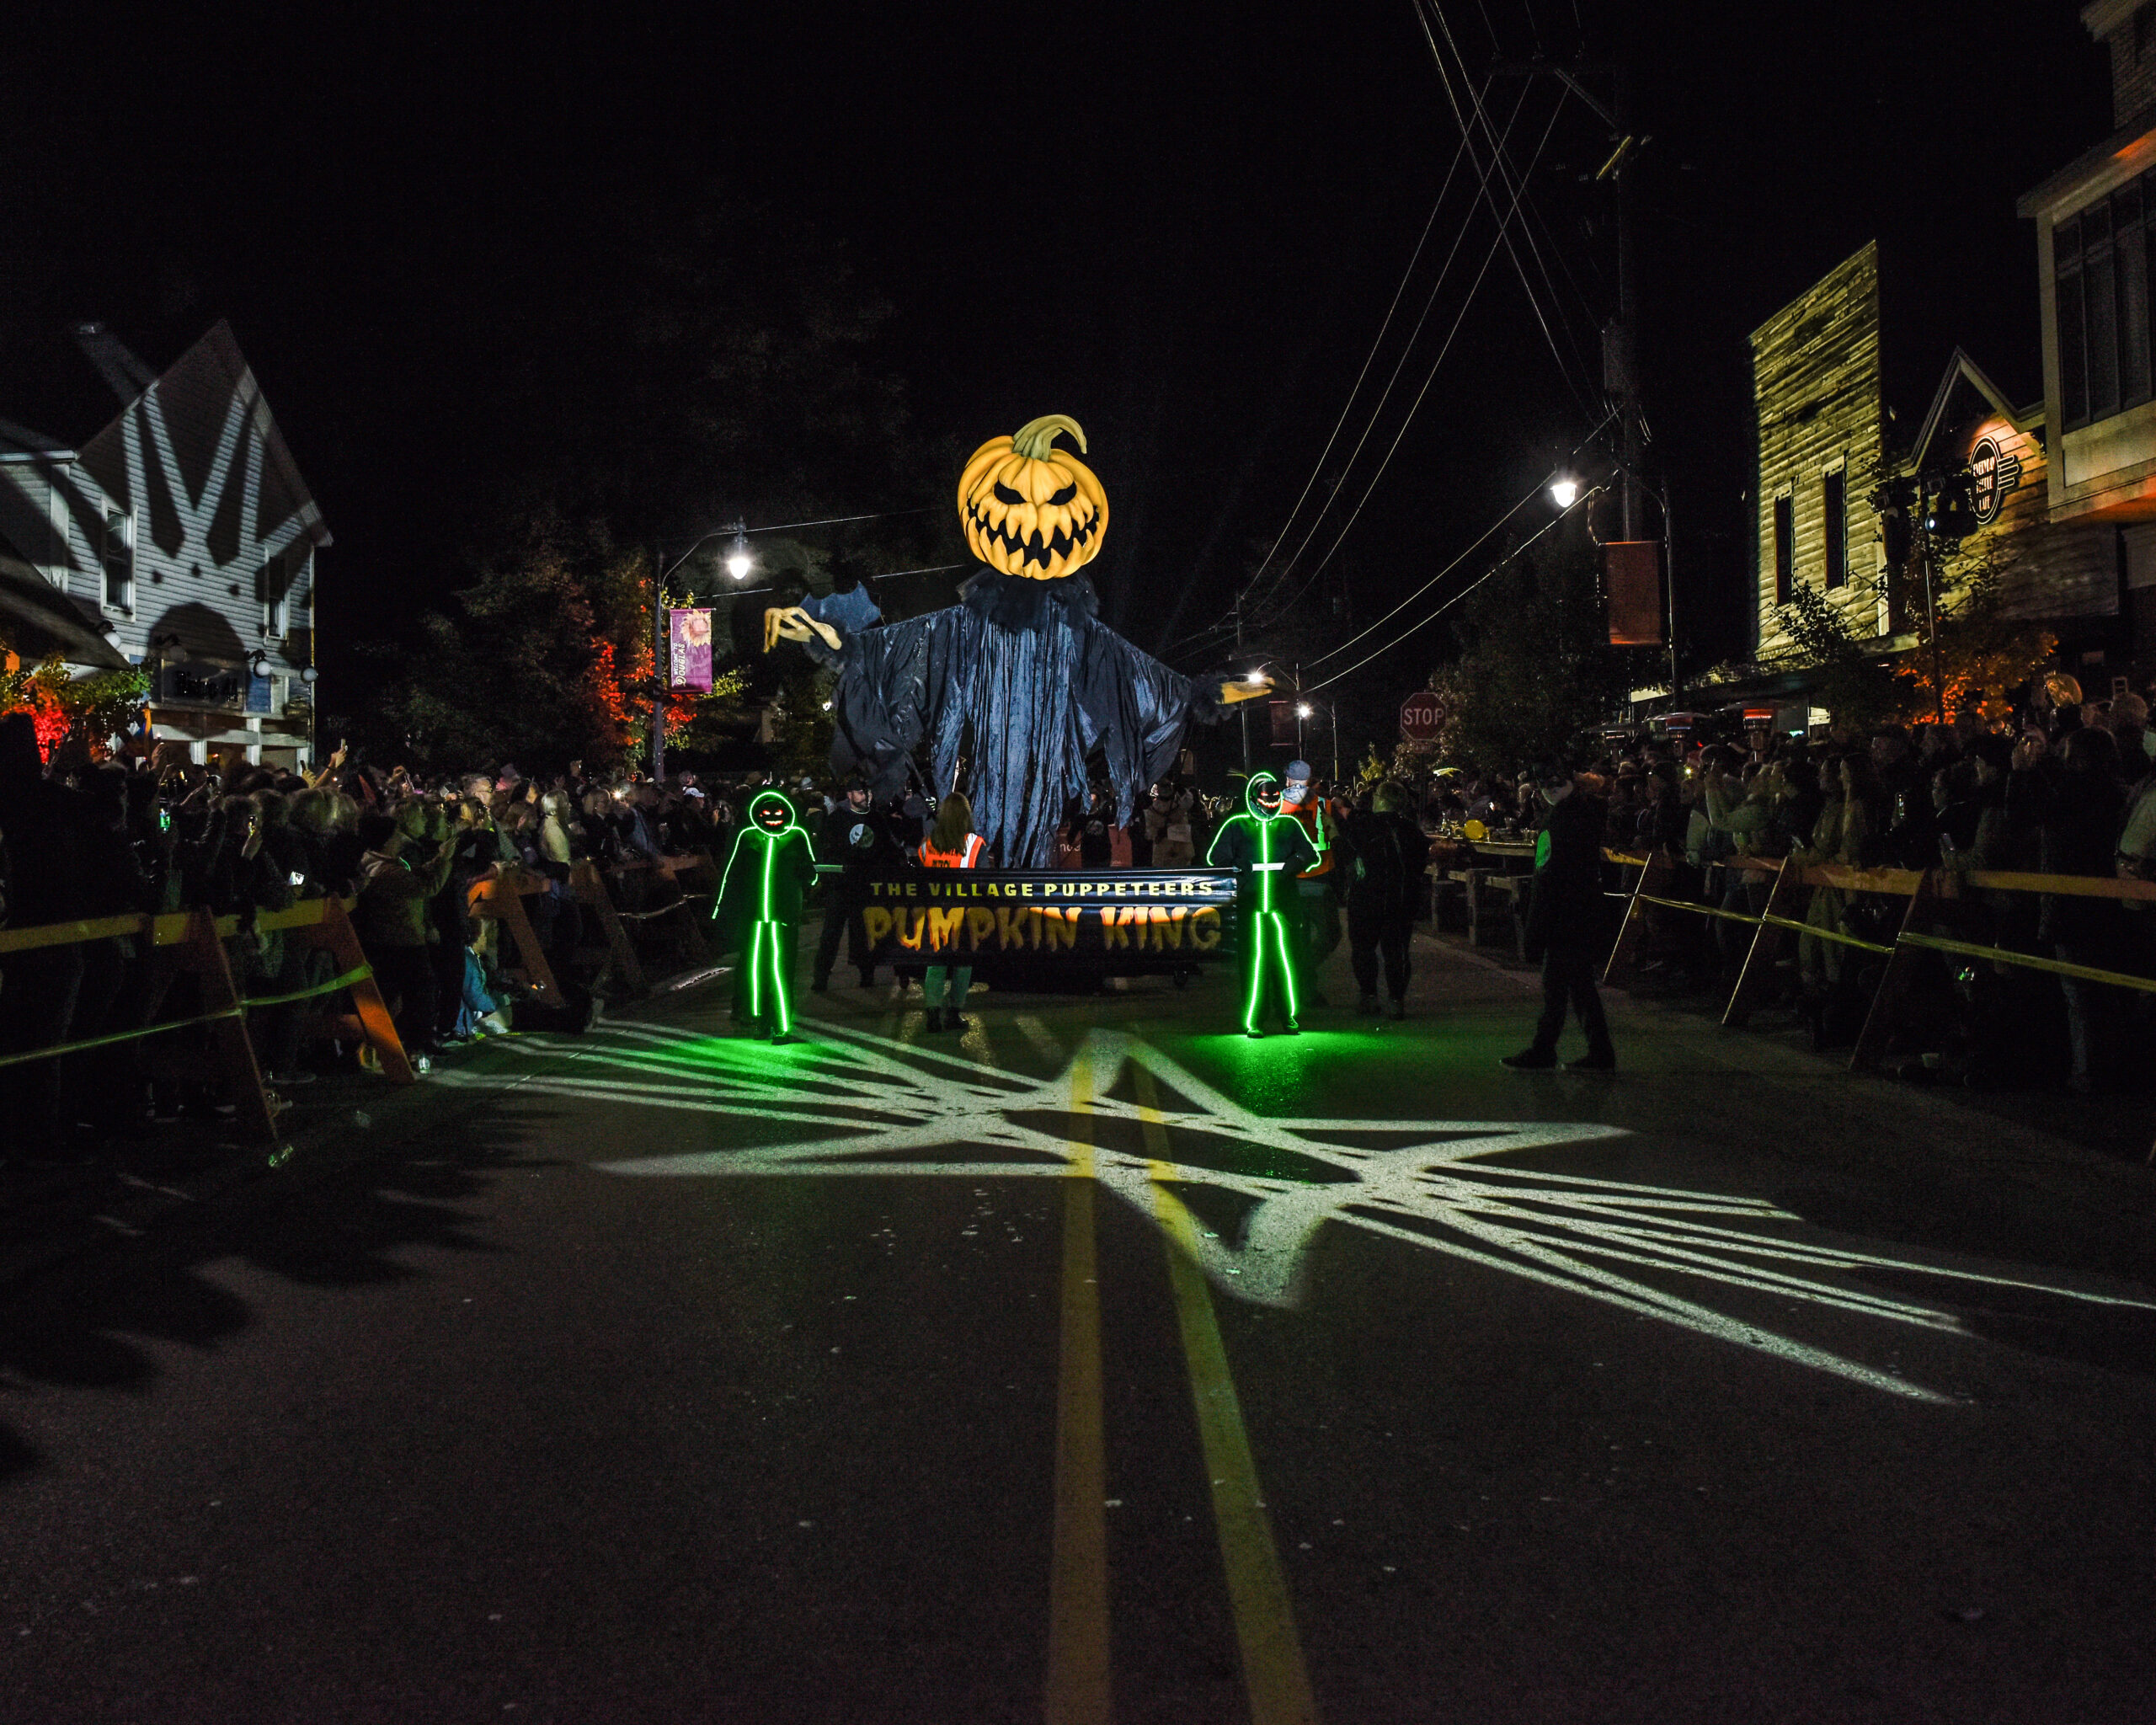 People in costumes line both sides of the street as a tall pumpkin parade float comes down the street for the Douglas Halloween Parade.